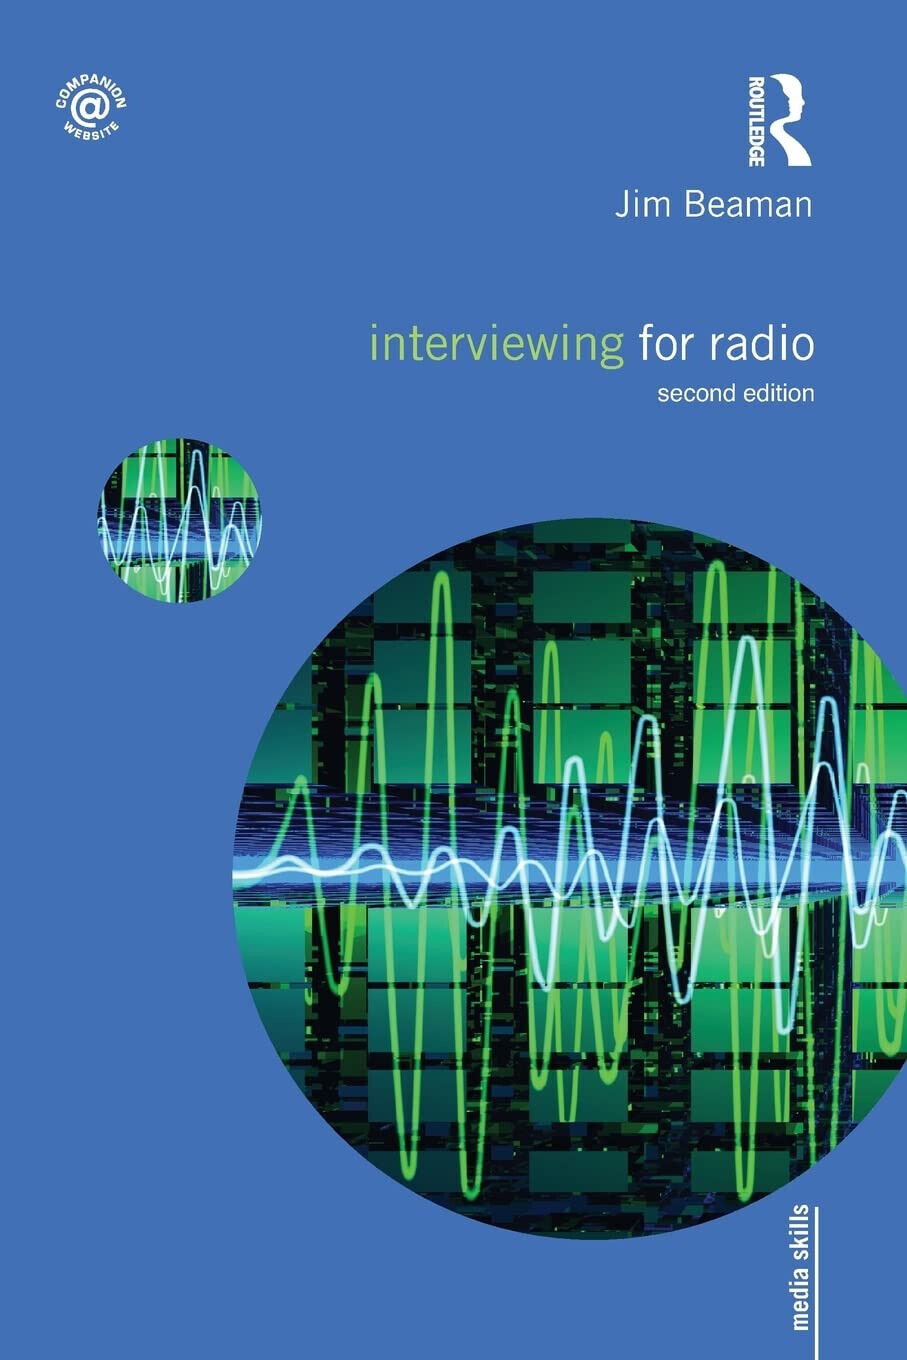 Interviewing for Radio - Jim Beaman - Routledge, 2011